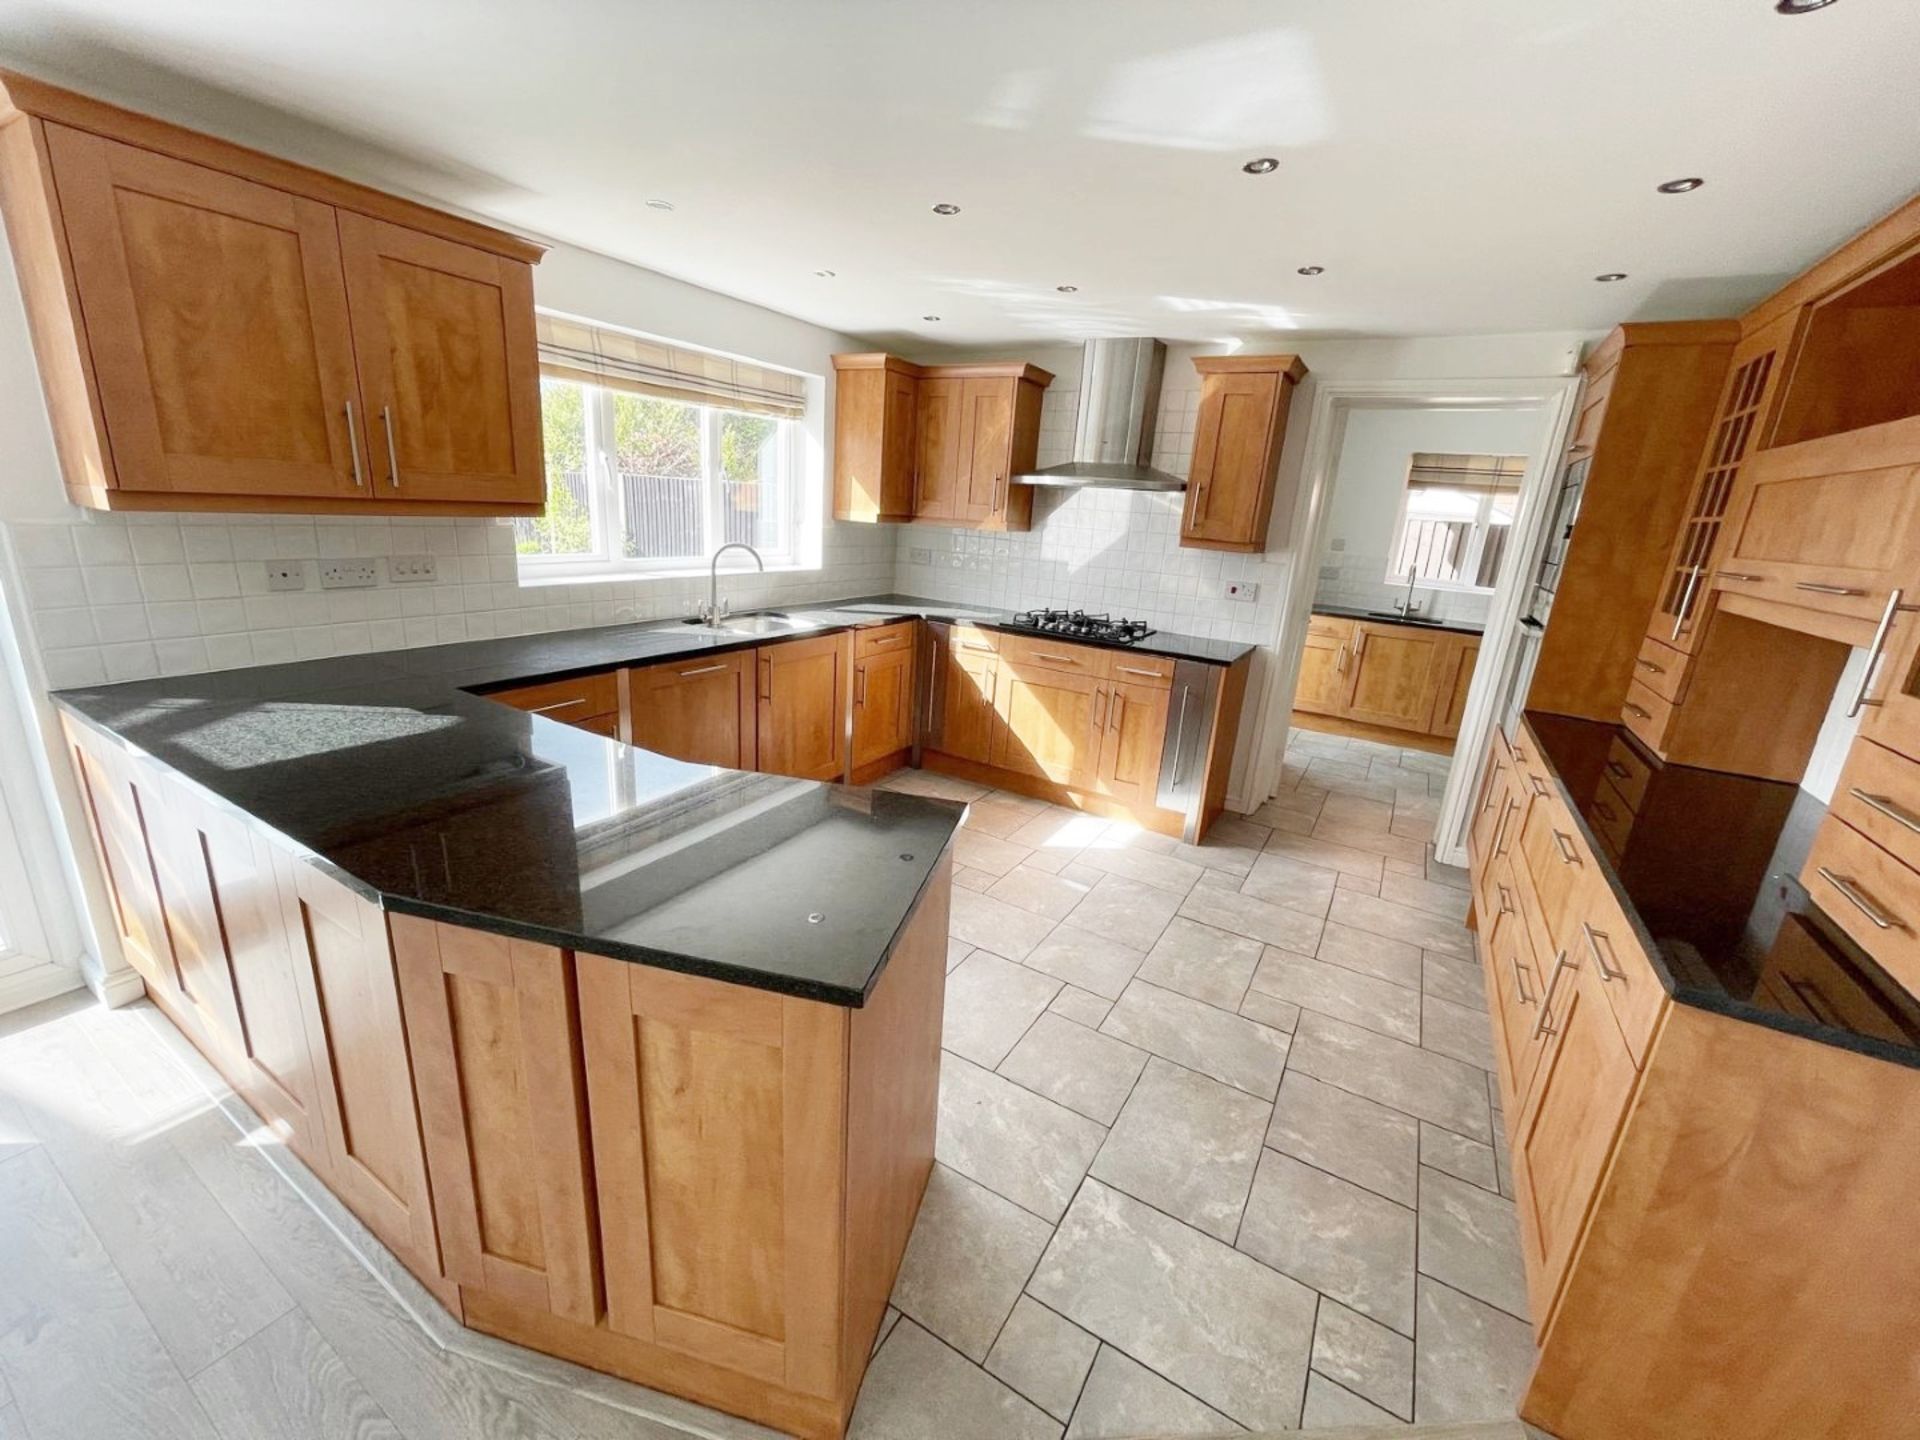 1 x Shaker-style, Feature-rich Fitted Kitchen with Solid Wood Doors, Granite Worktops and Appliances - Image 9 of 111